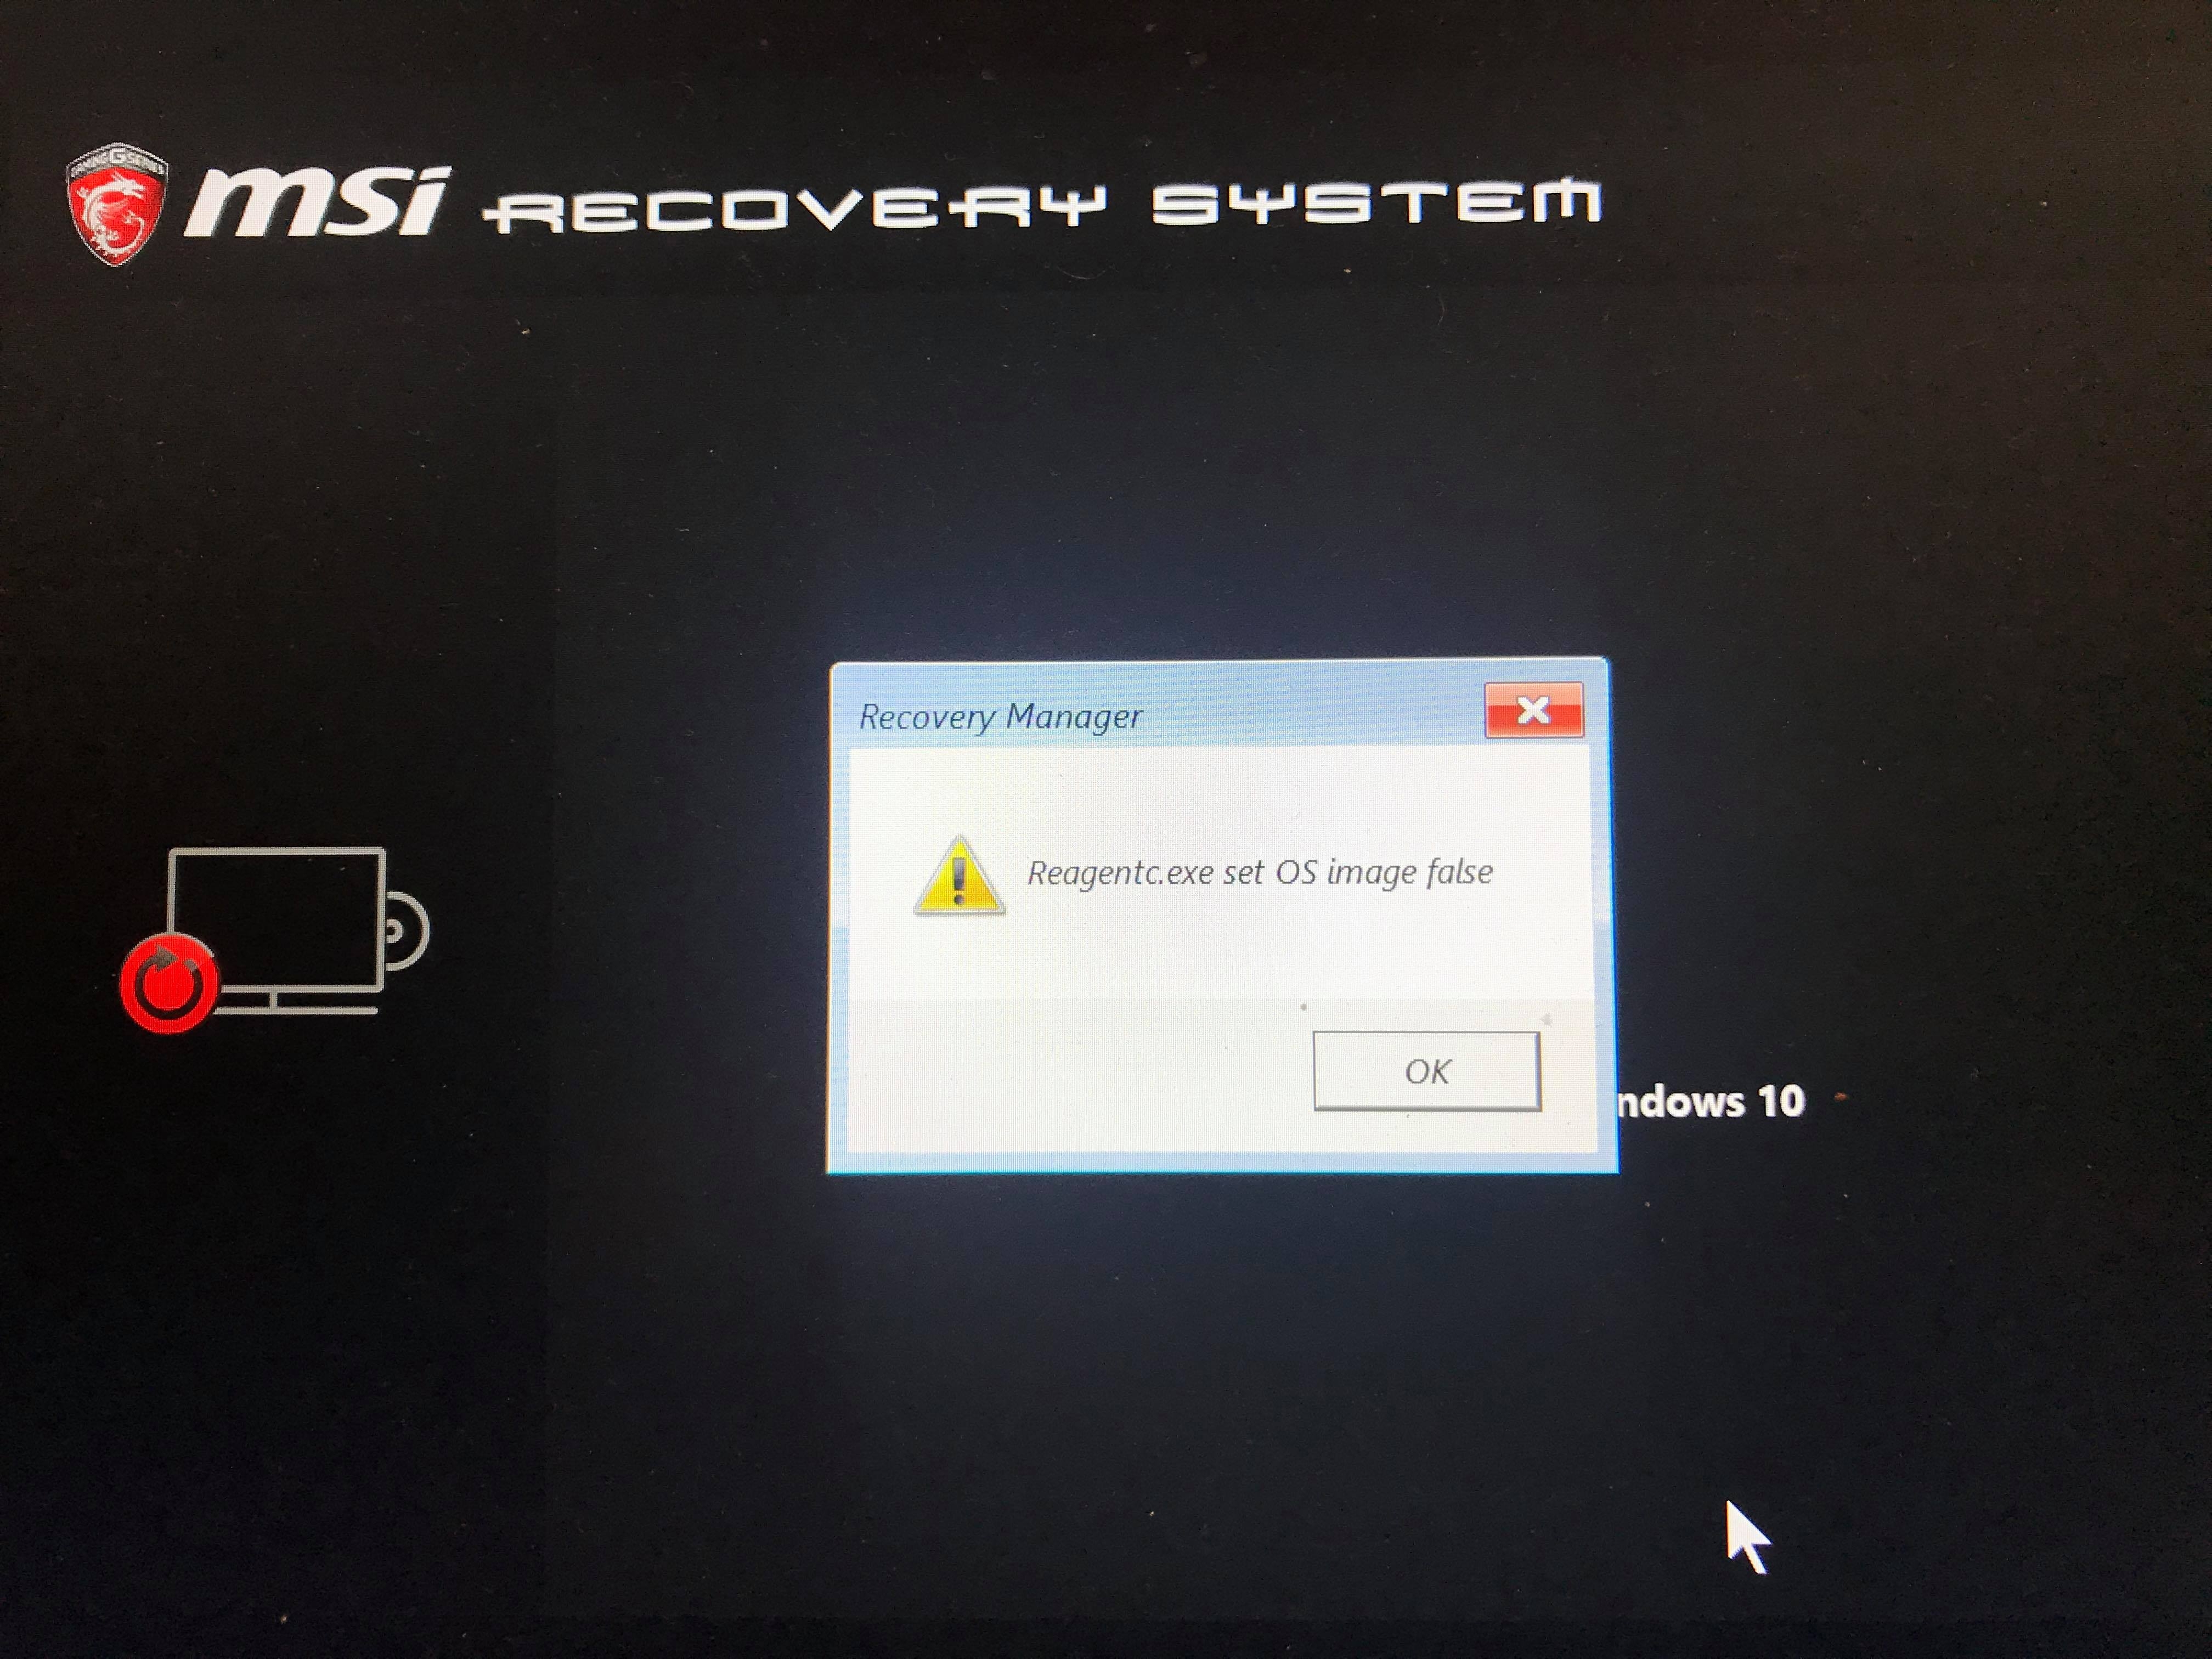 Fatal error online session interface missing please make sure steam is running фото 22